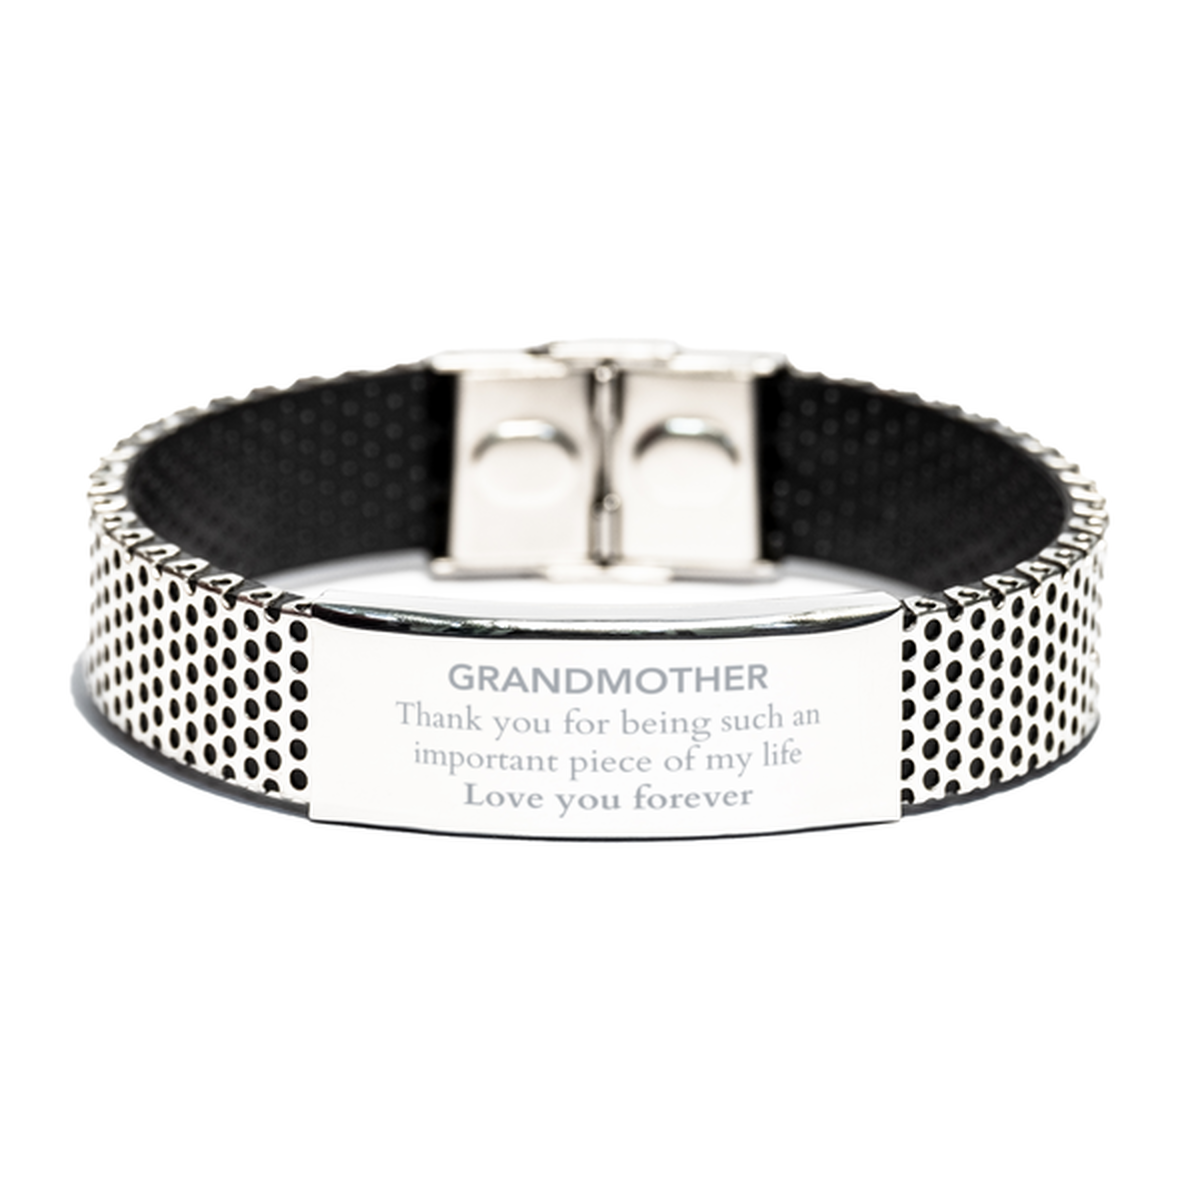 Appropriate Grandmother Stainless Steel Bracelet Epic Birthday Gifts for Grandmother Thank you for being such an important piece of my life Grandmother Christmas Mothers Fathers Day